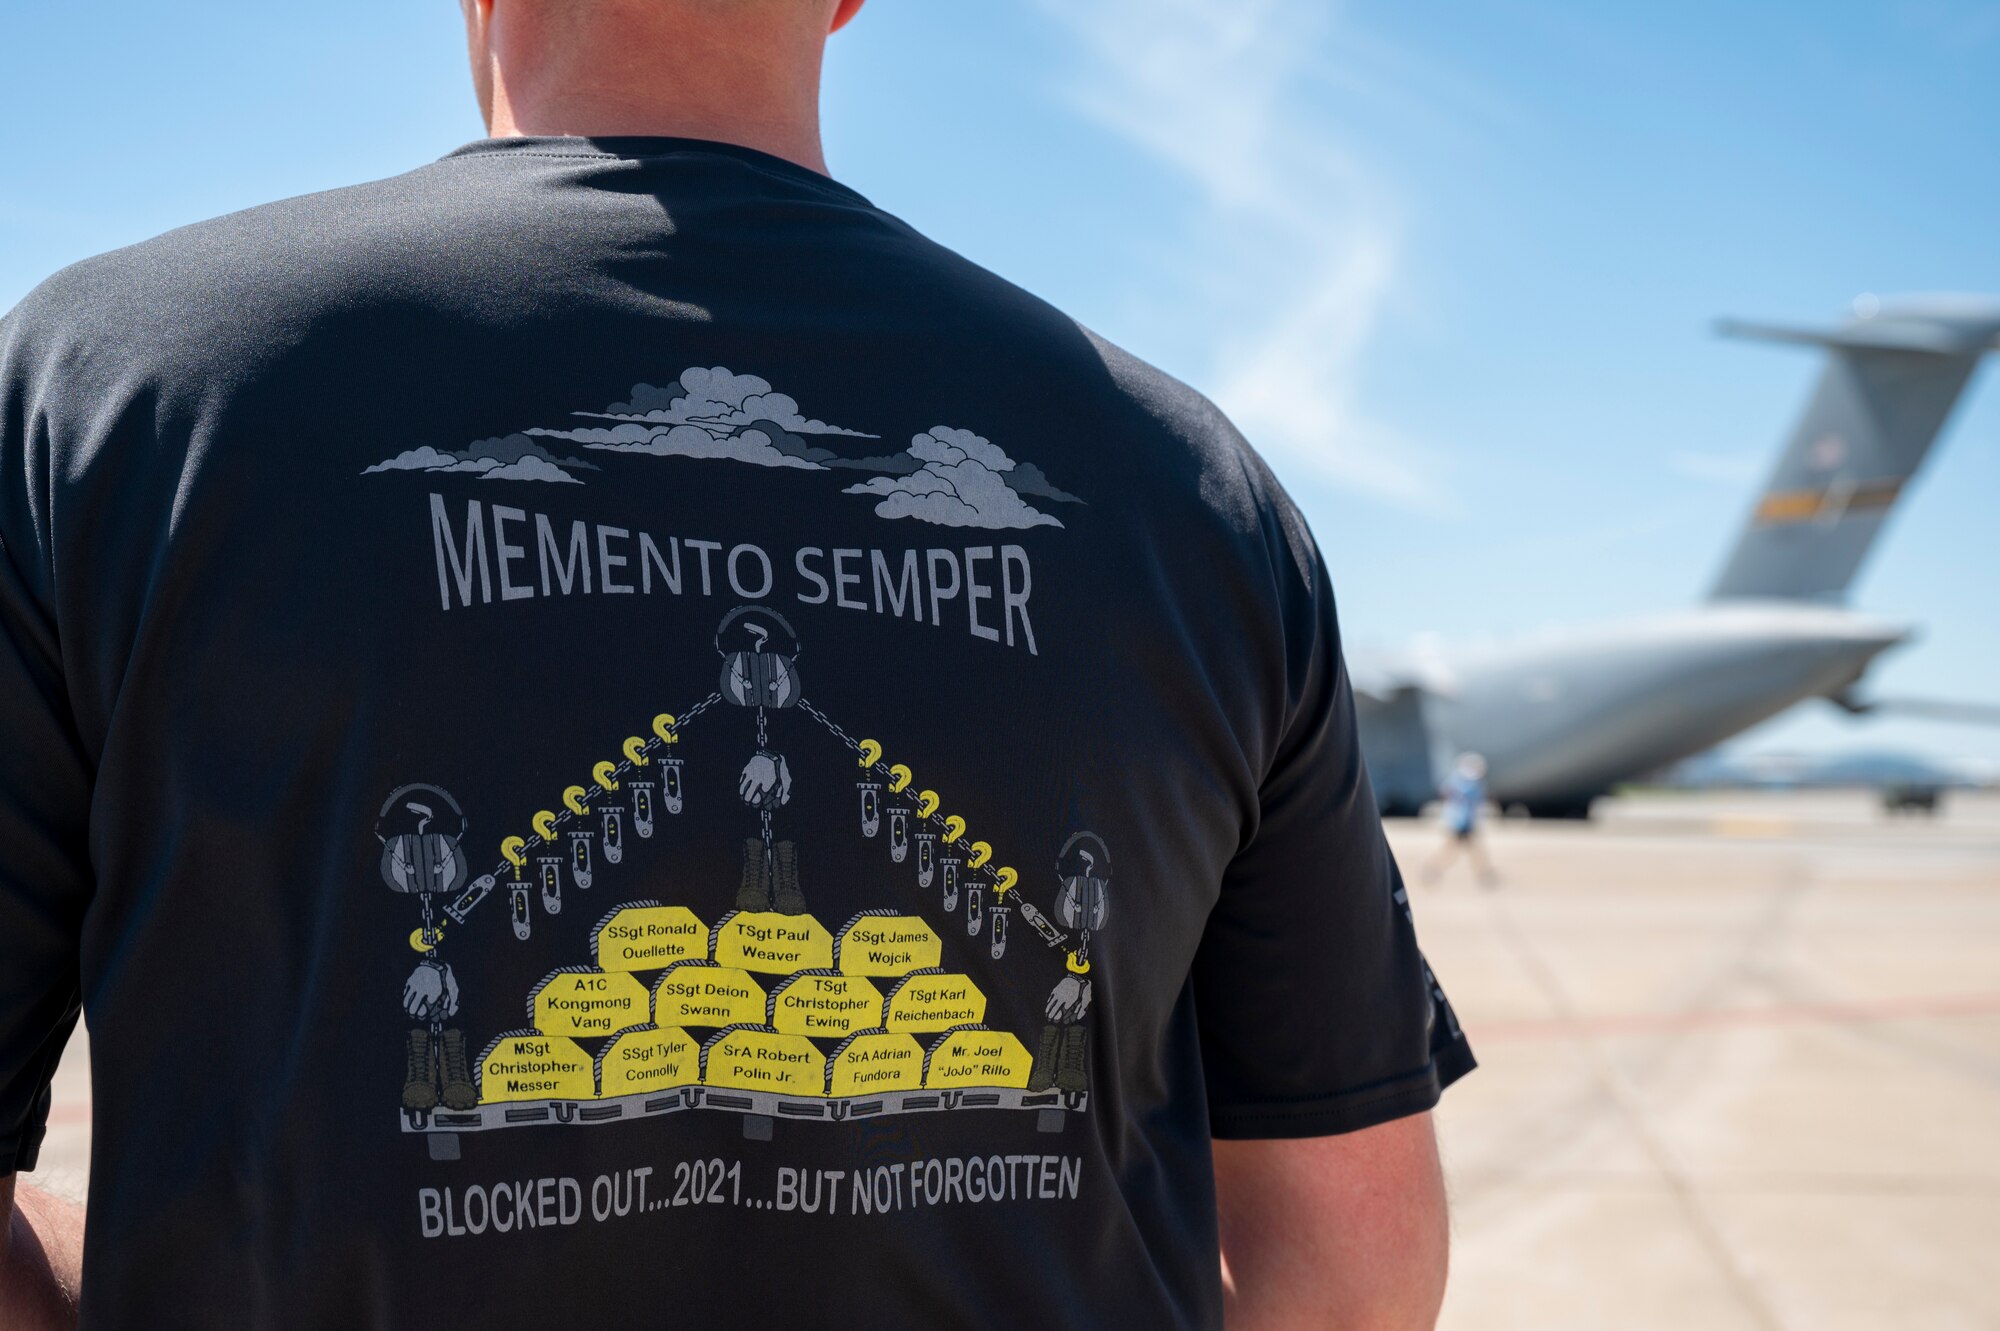 Chief Master Sgt. Michael Heim, 32nd Aerial Port Squadron superintendent, waits for fellow Airmen to finish the annual Port Dawg Memorial Run at the Pittsburgh International Airport Air Reserve Station, Pennsylvania, May 1, 2021. The names on the back of the shirt are aerial port Airmen that have passed since last year.